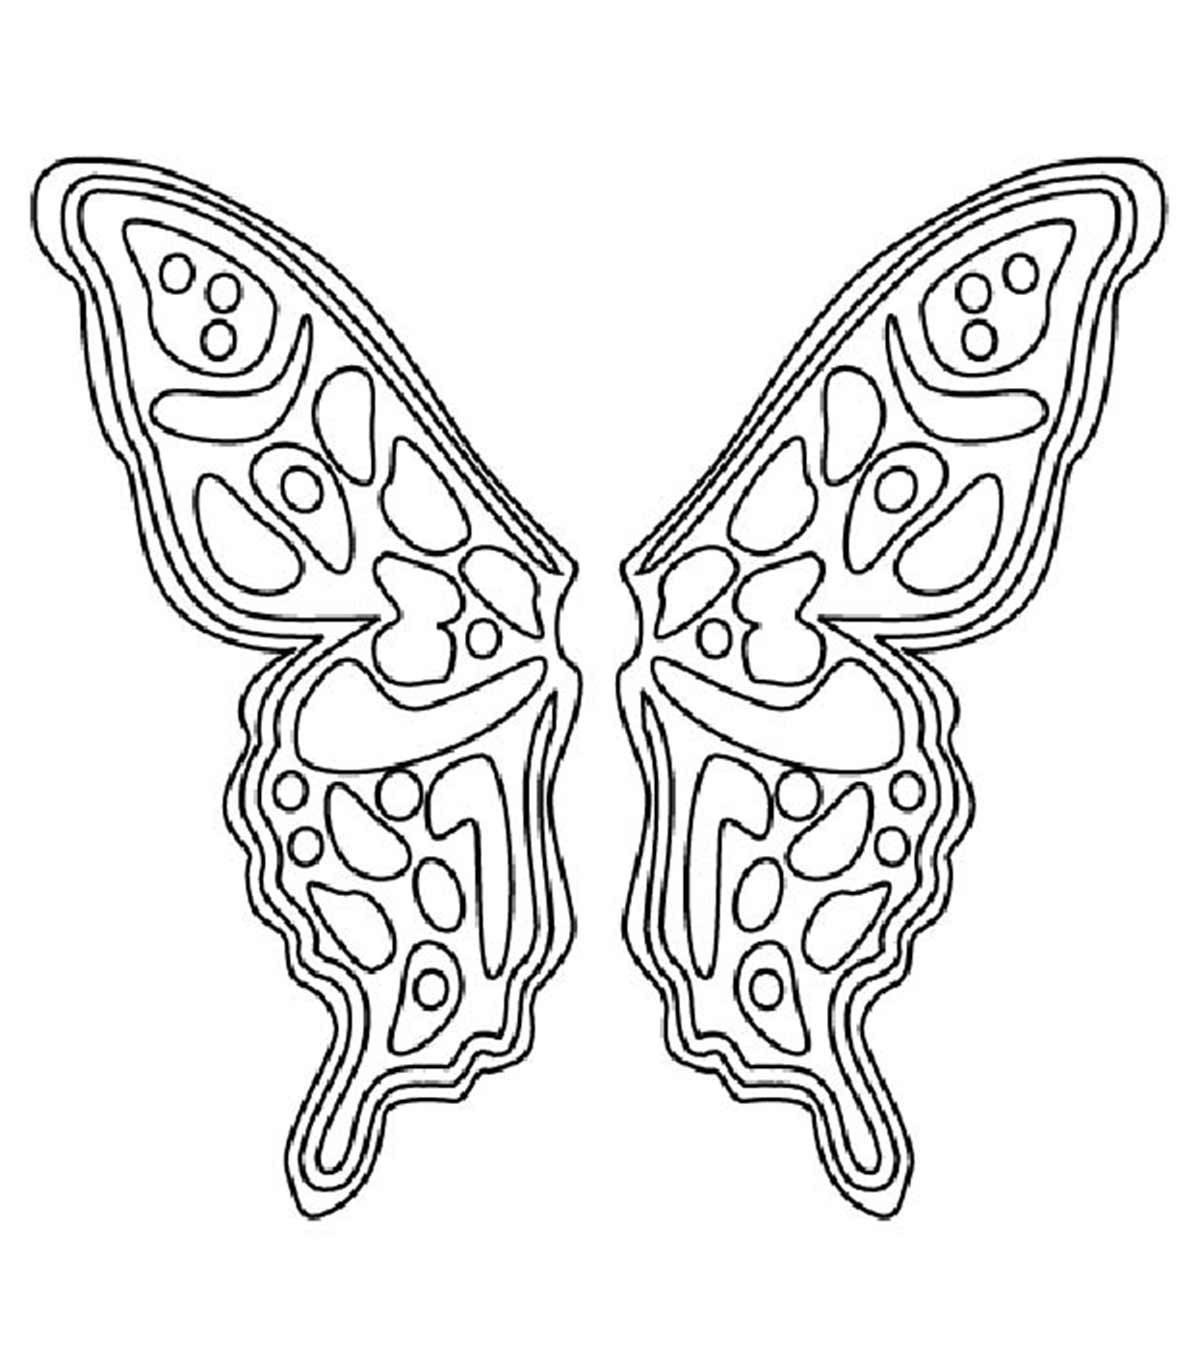 Pattern Coloring Pages - MomJunction